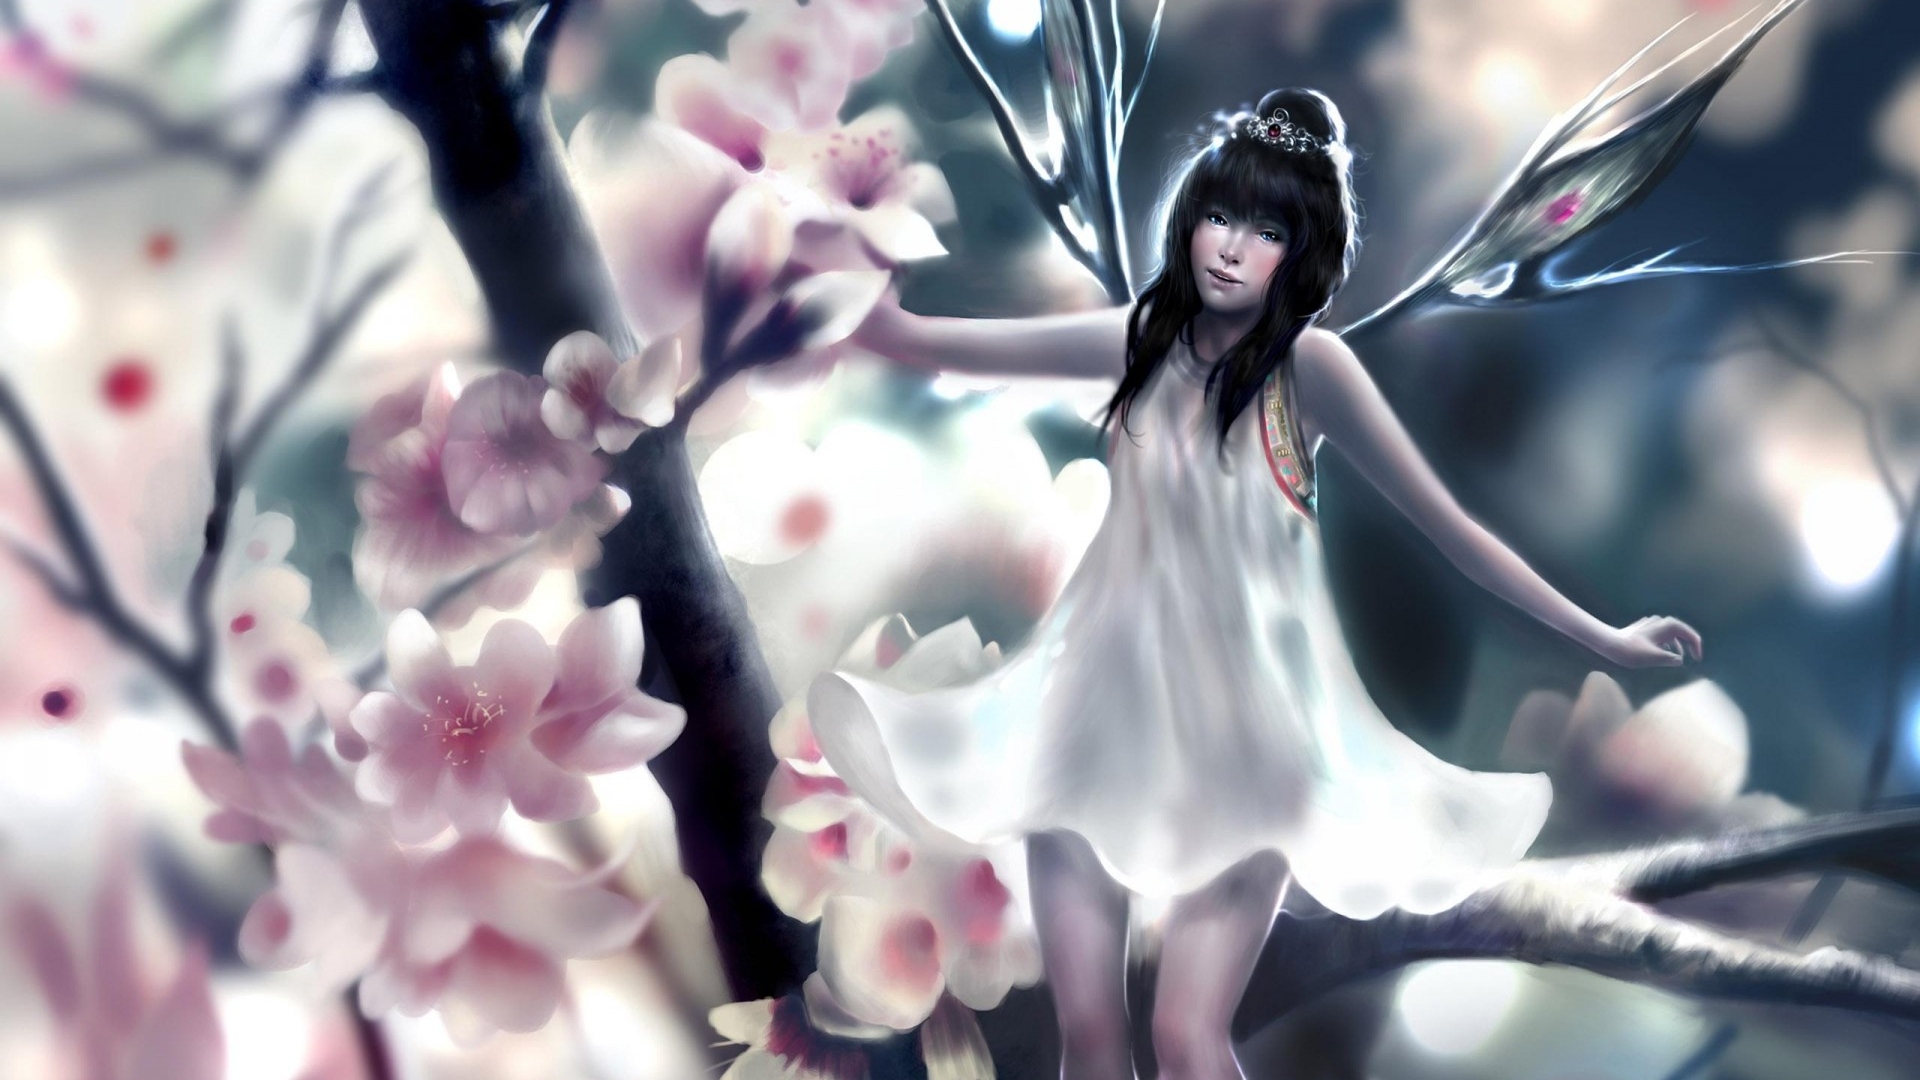 Girl with butterfly wings Beautiful fairy wallpaper hd for Desktop   Wallpapers13com